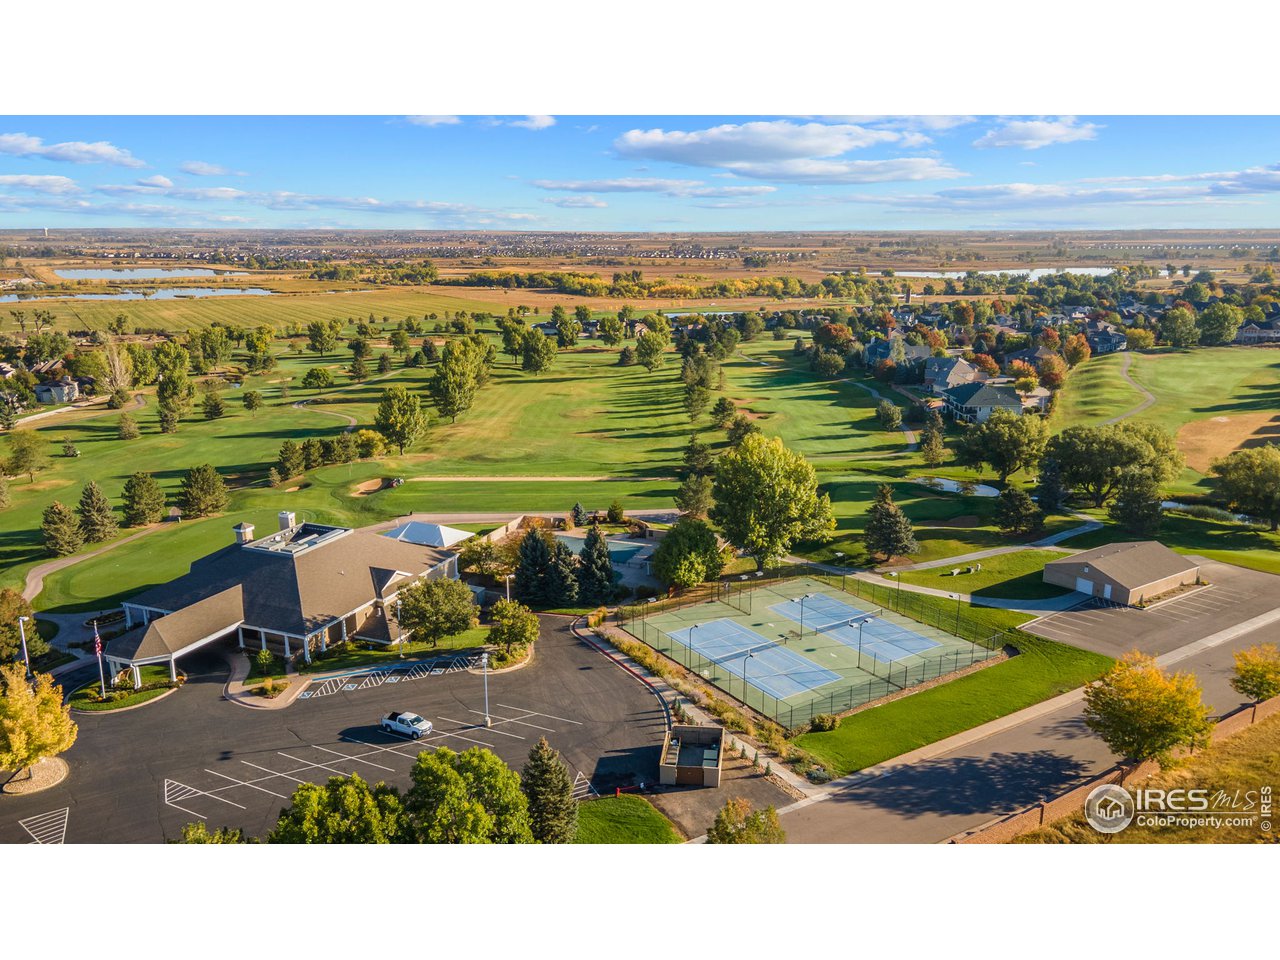 Ptarmigan clubhouse, tennis courts, and swimming pool